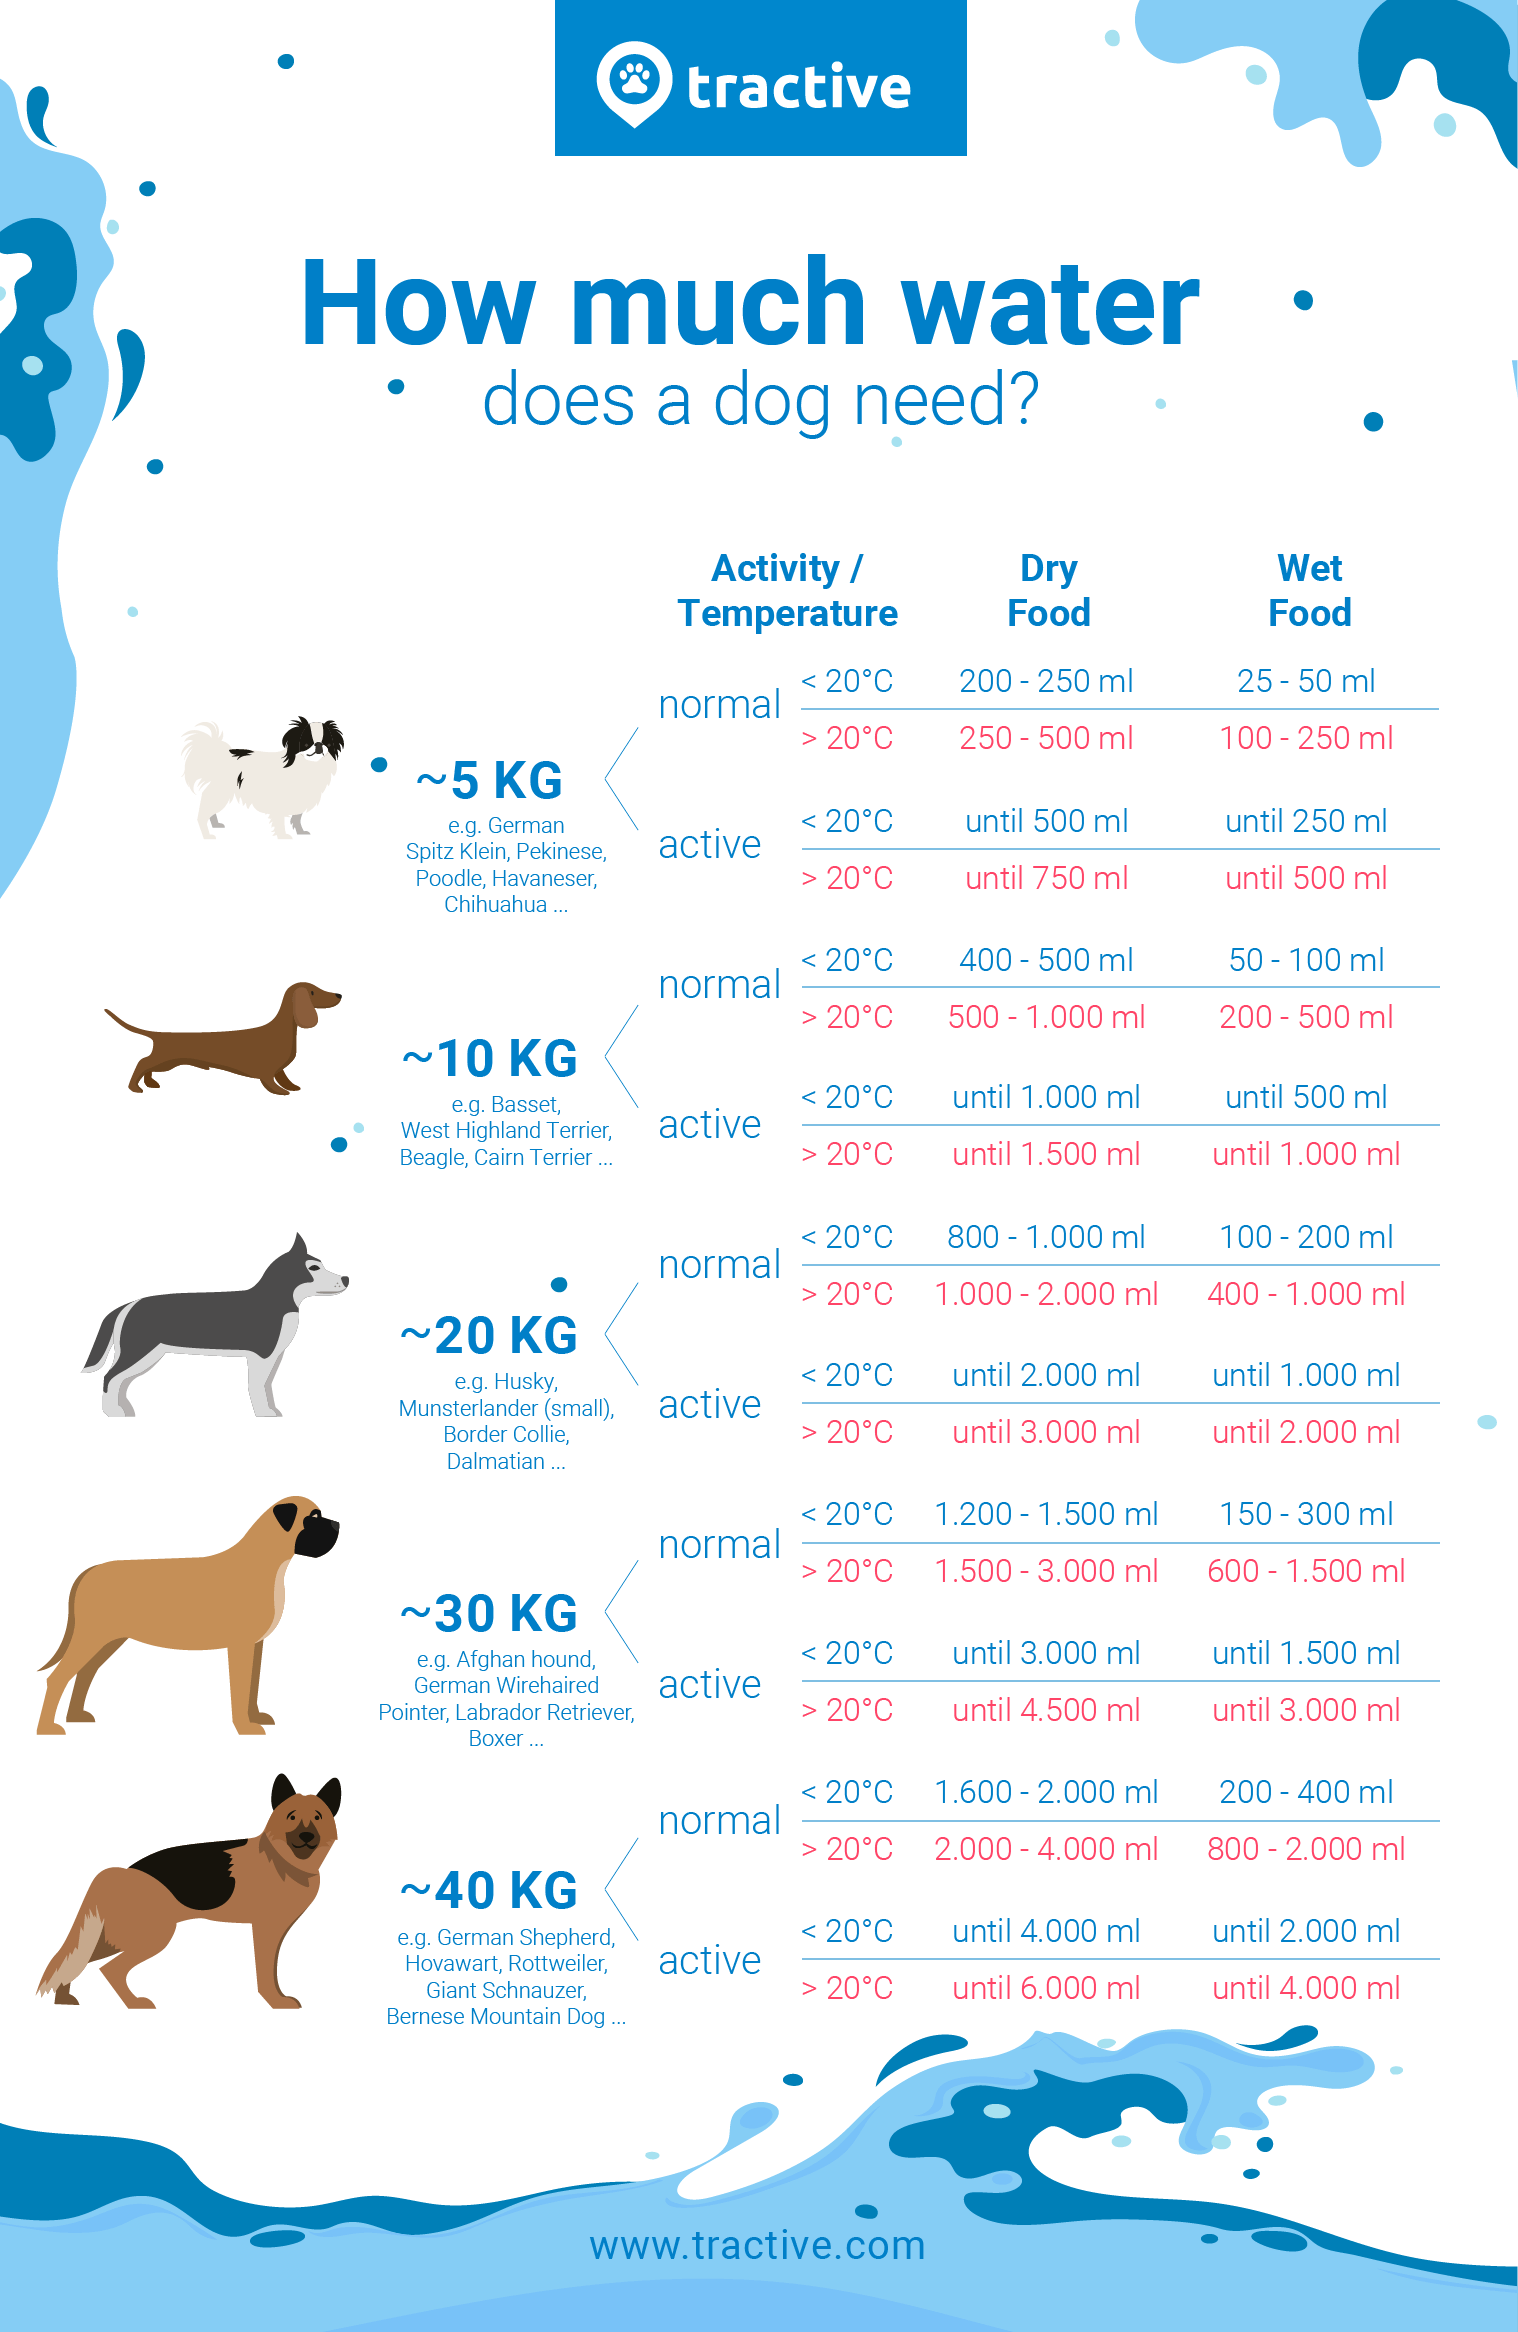 infographic overview of how much water a dog needs by size, activity level, and food type